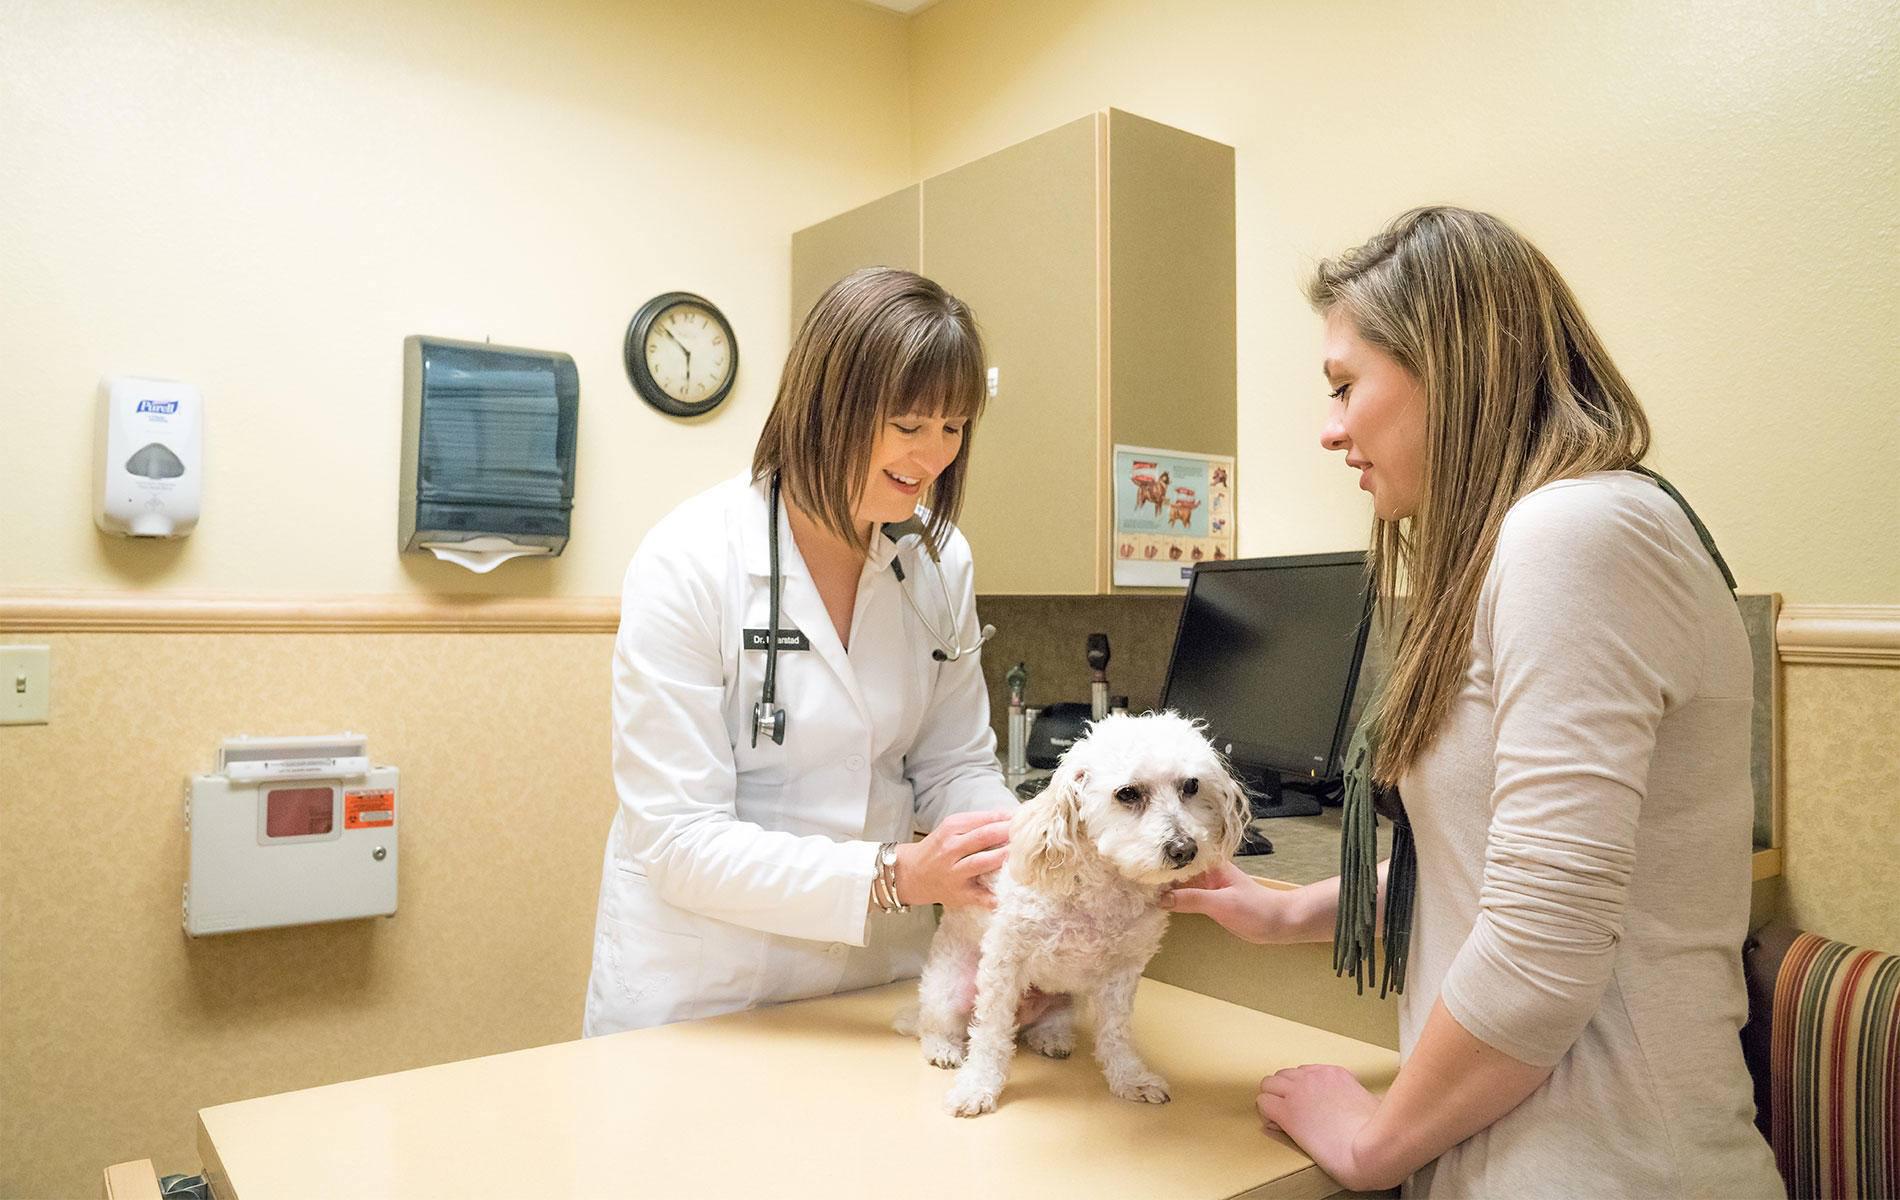 Intradermal (skin) allergy testing identifies which environmental allergens are causing your pet's symptoms. At Haarstad Veterinary Dermatology, Dr. Amy Haarstad provides care, examinations, and solutions to dermatology issues facing your pets today.